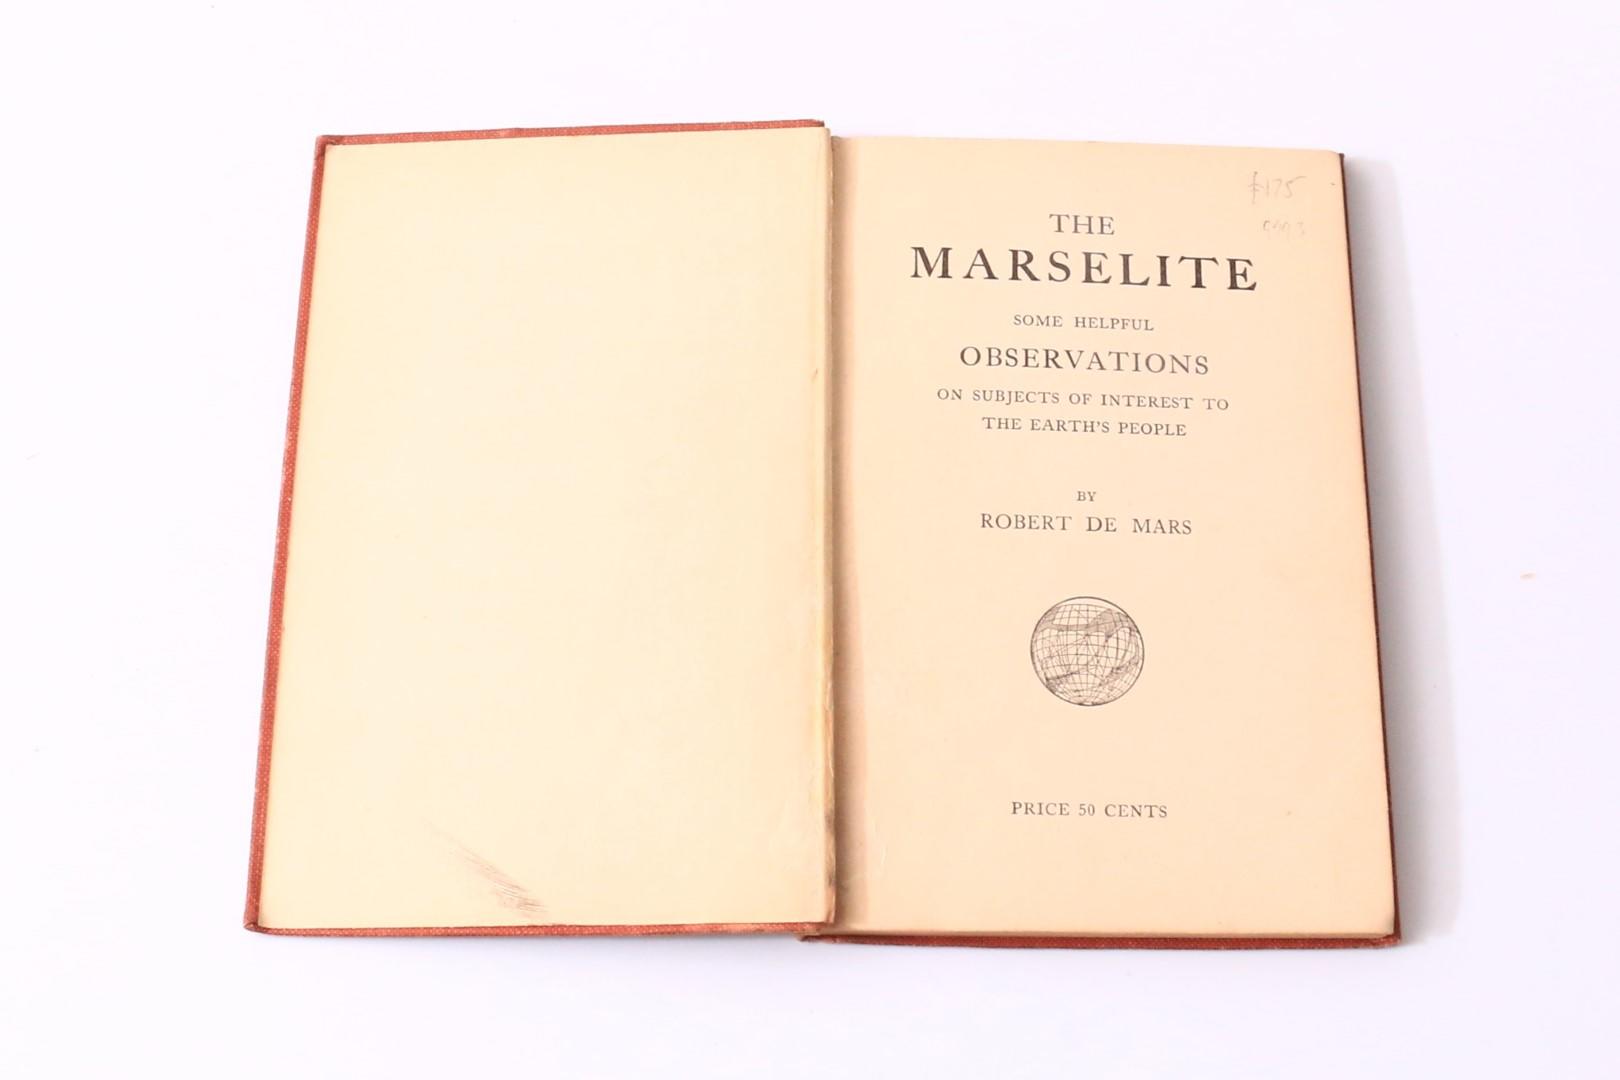 Robert De Mars - The Marselite: Some Helpful Observations on Subjects of Interest to the Earth's People - J.F. Ryan, 1911, First Edition.